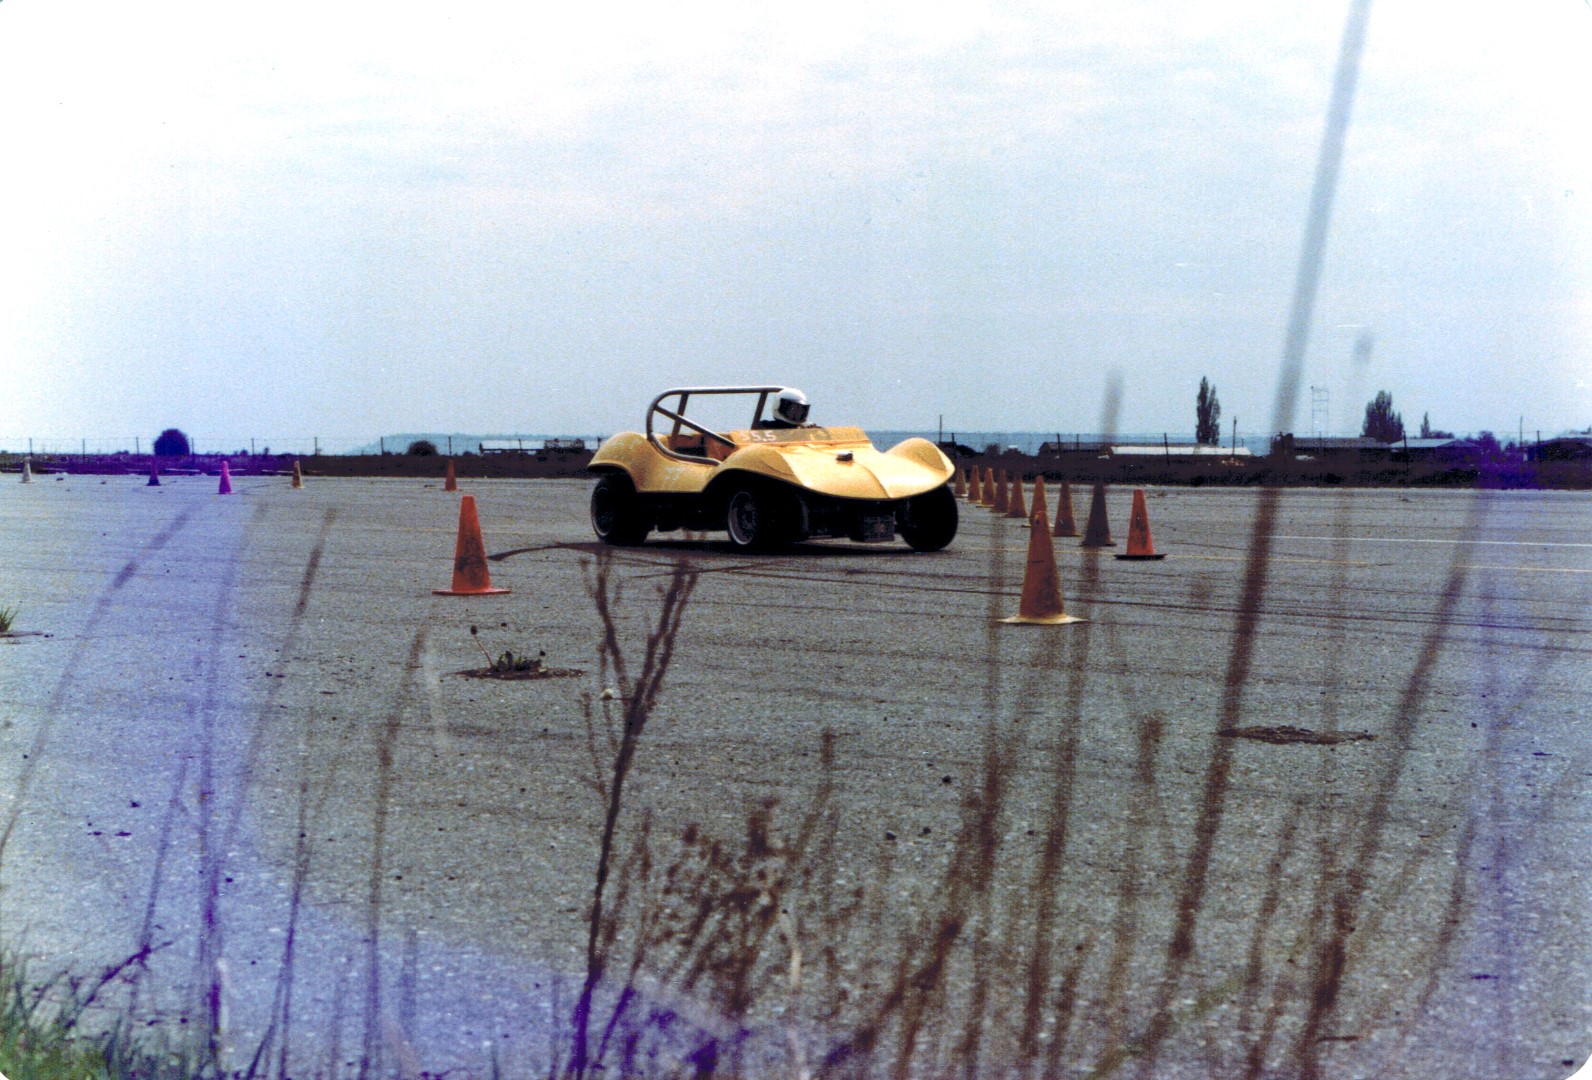 John Haftner's Porsche powered dune buggy, FTD car. Went on to set Hill record at Knox, which stands to this day.